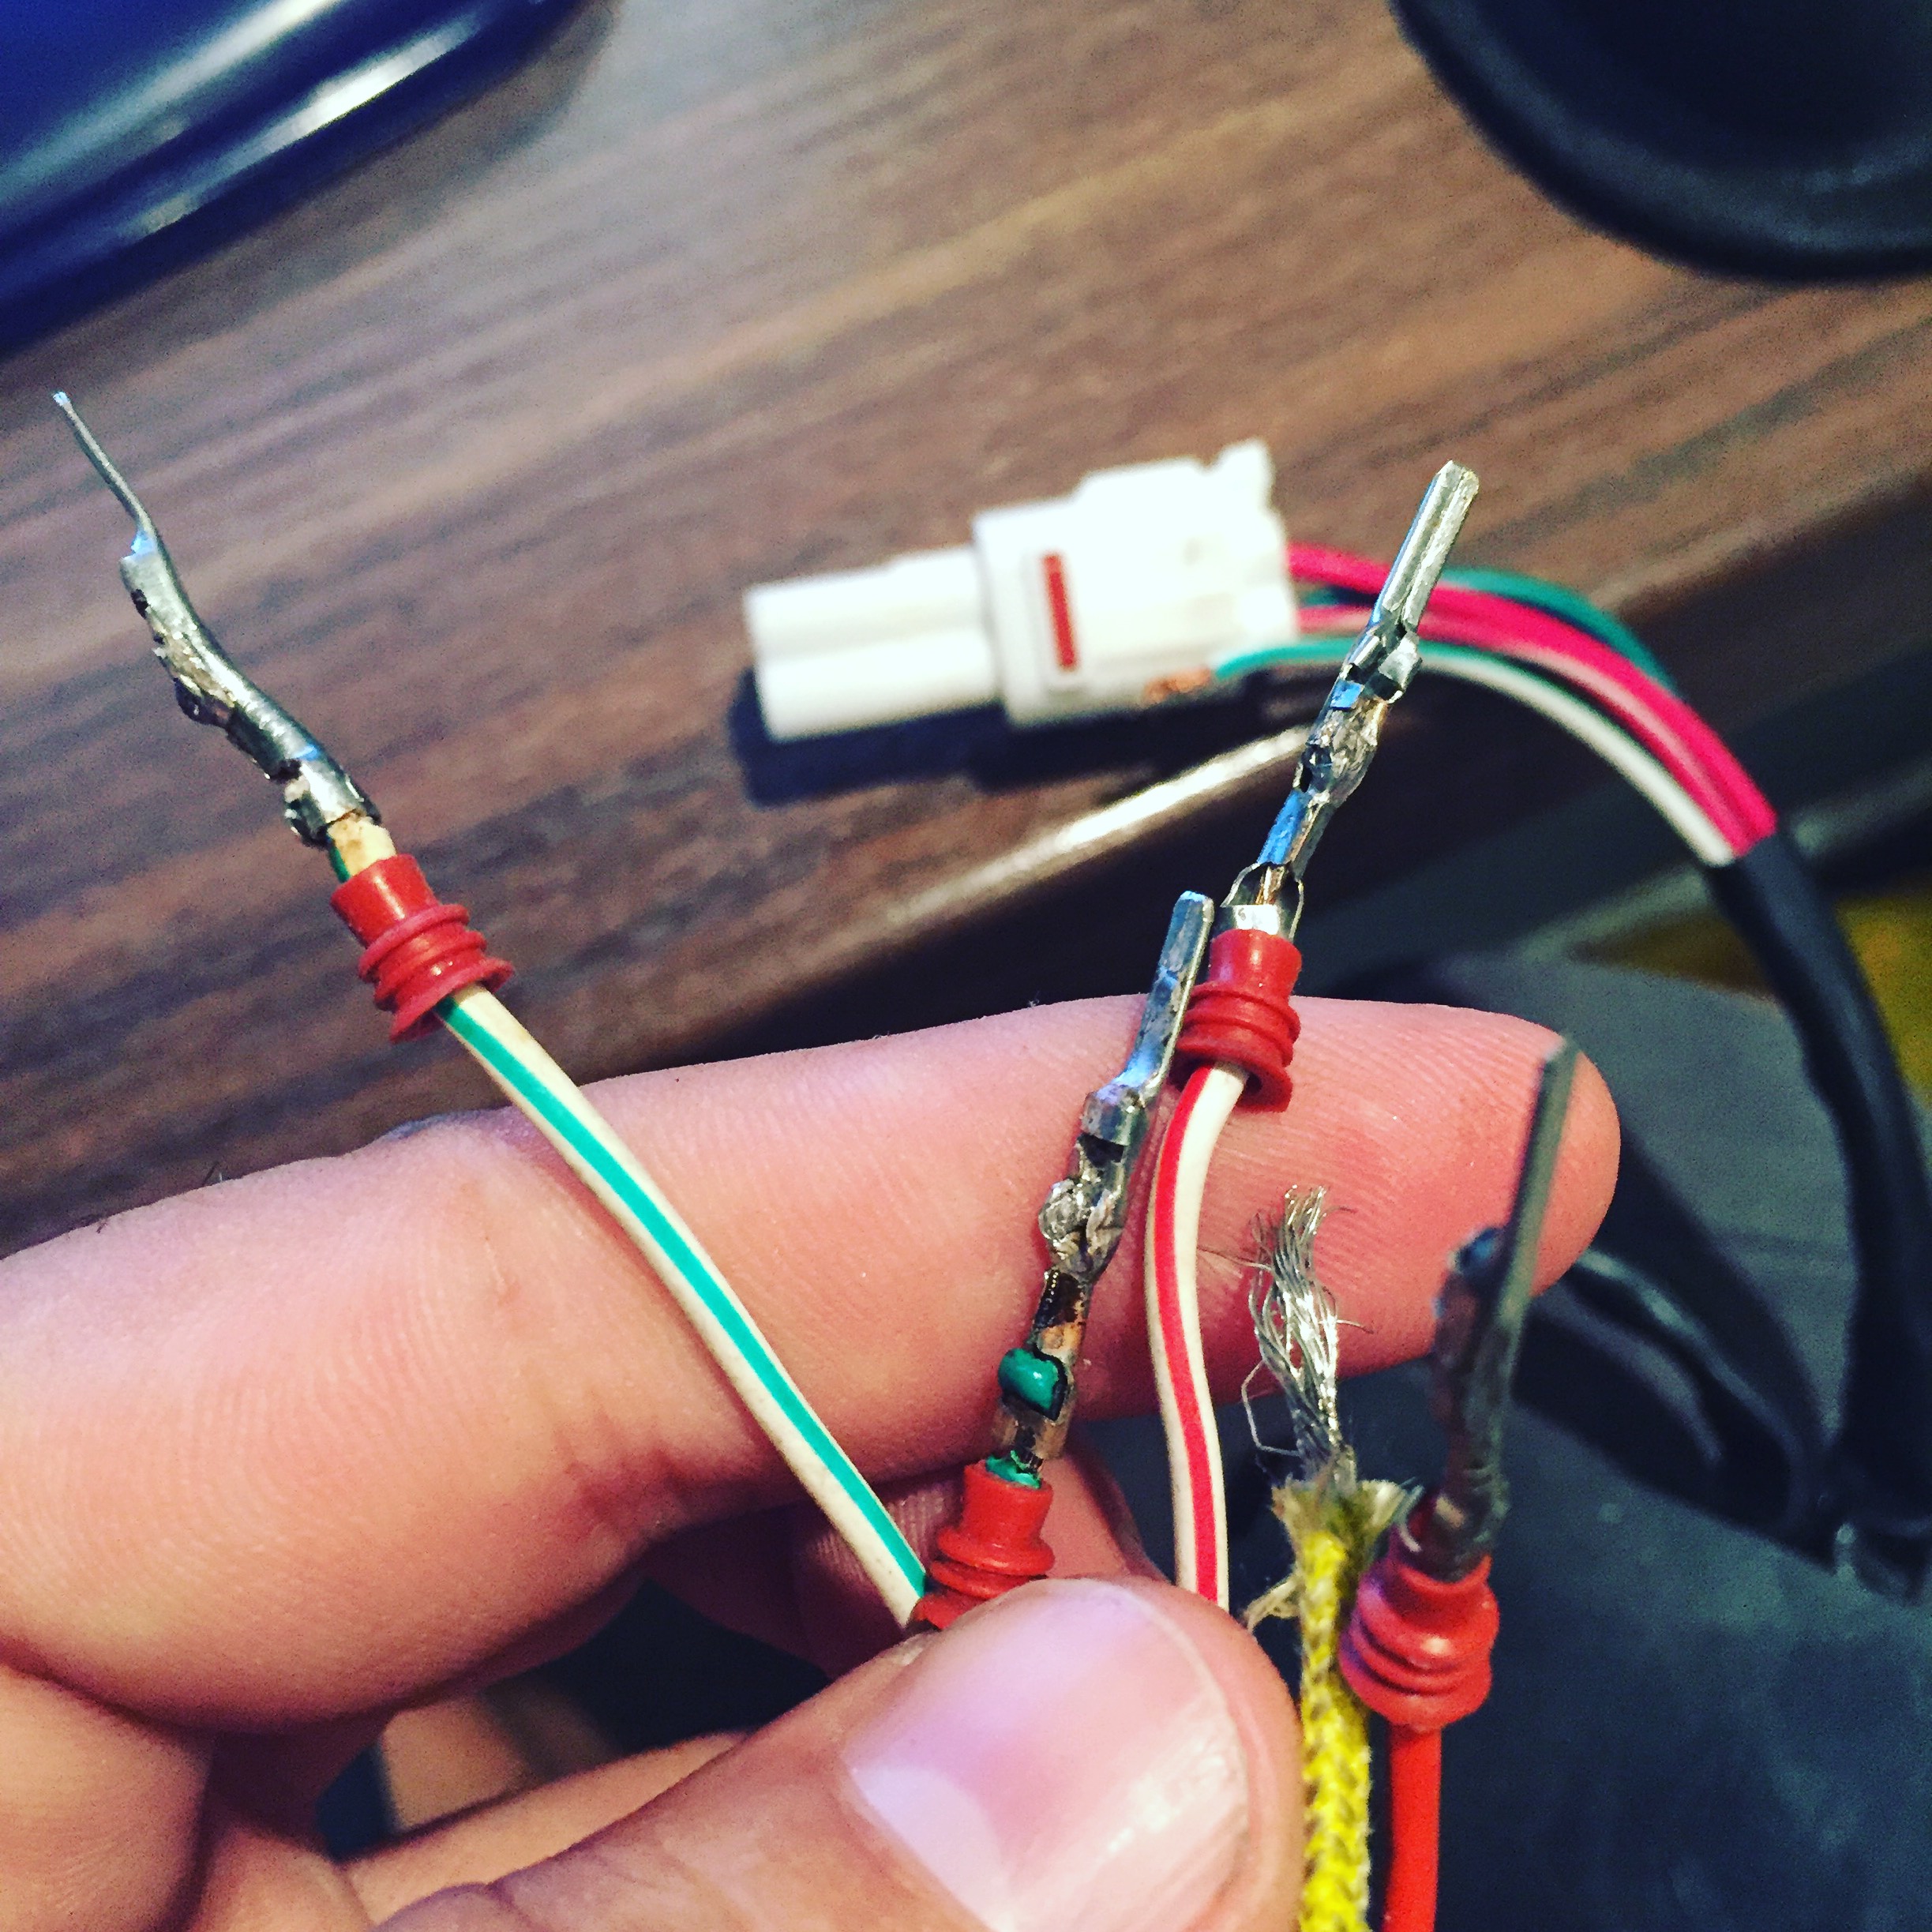 How-To: Properly Crimp Wires and Terminals - Hughs Hand Built